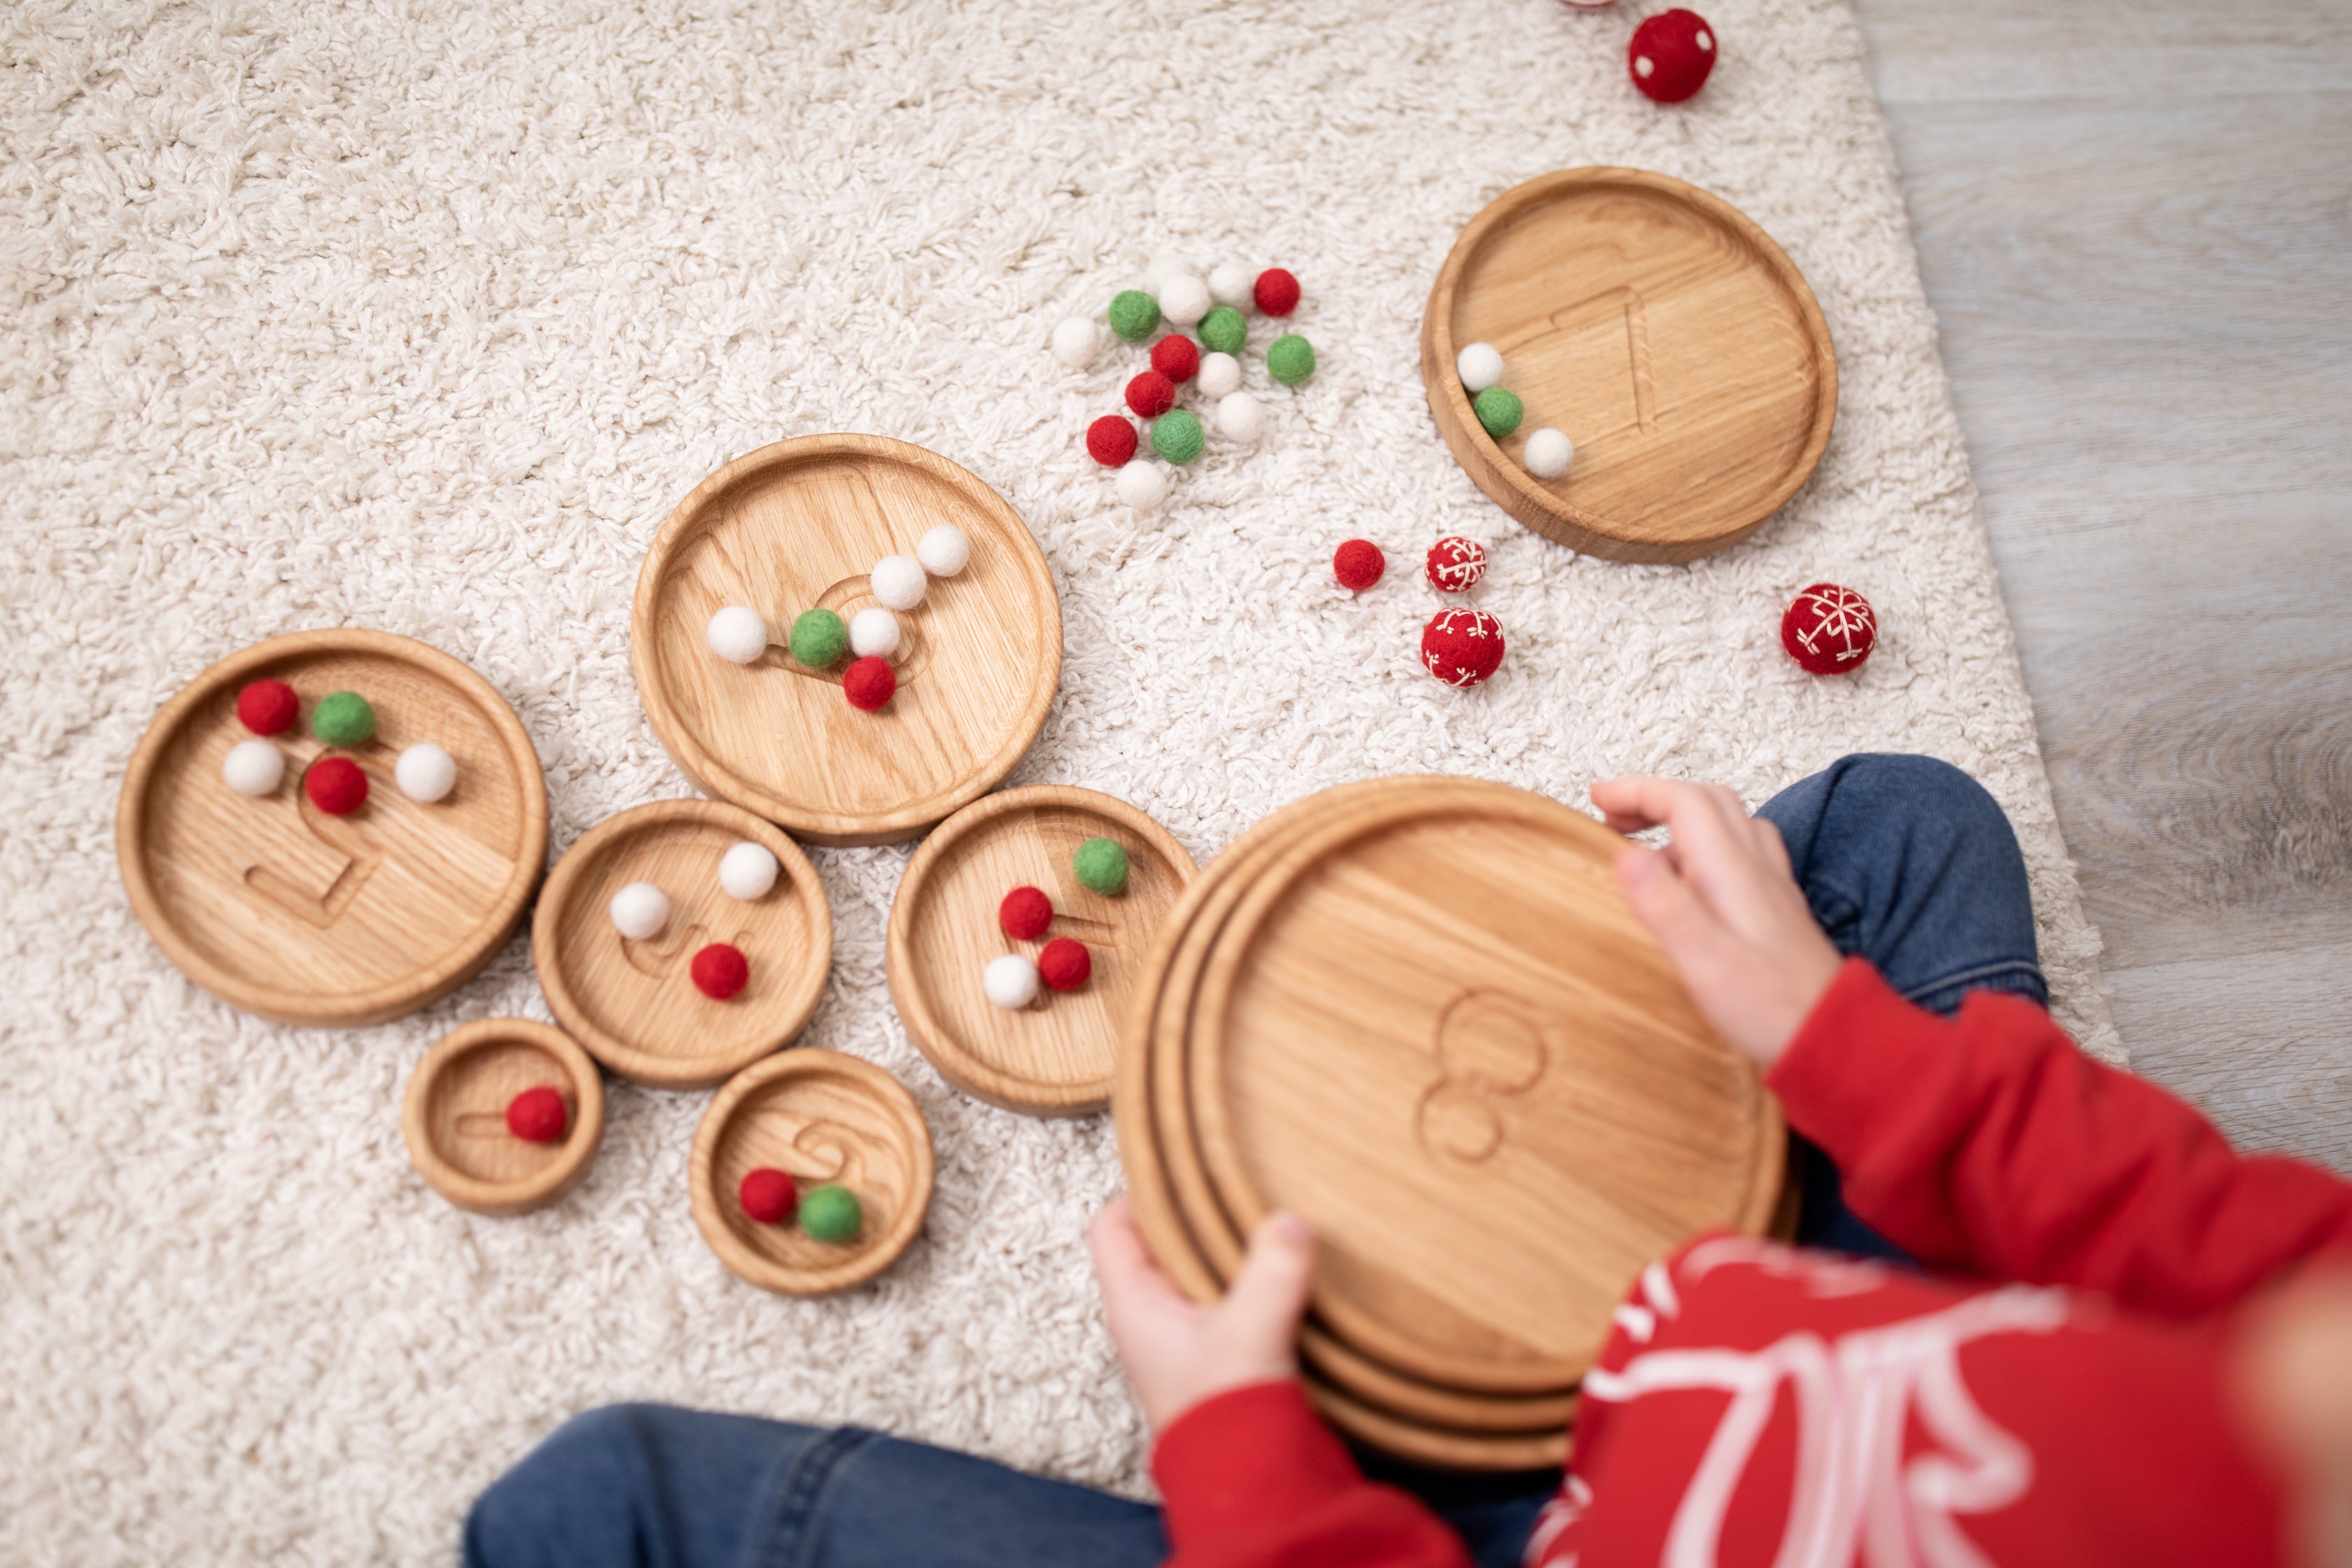 Sorting Plates or Trays with Numbers, Montessori educational materials, homeschool, learning numbers, toddler gift